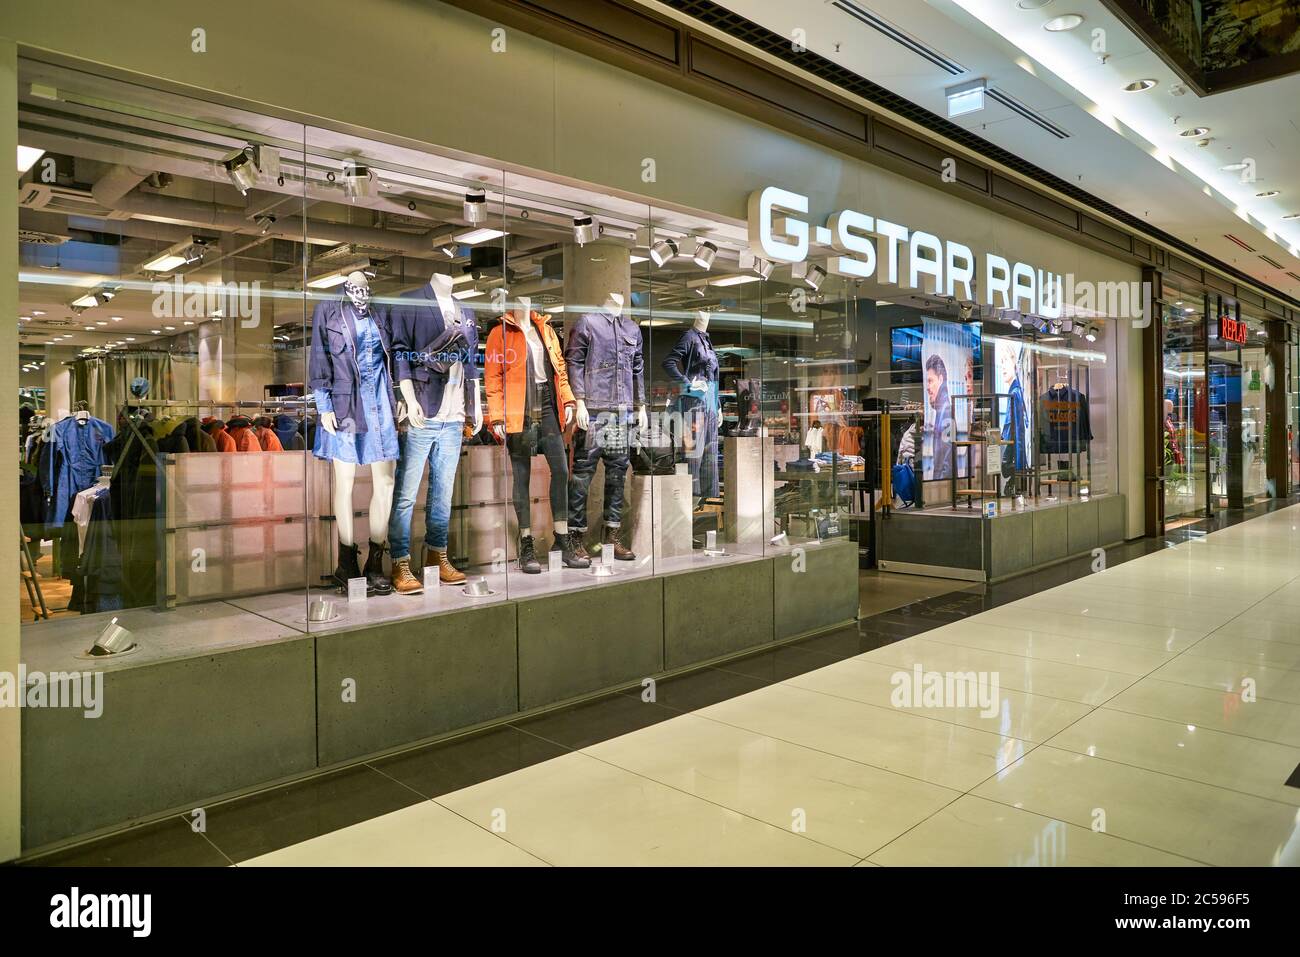 g star outlet